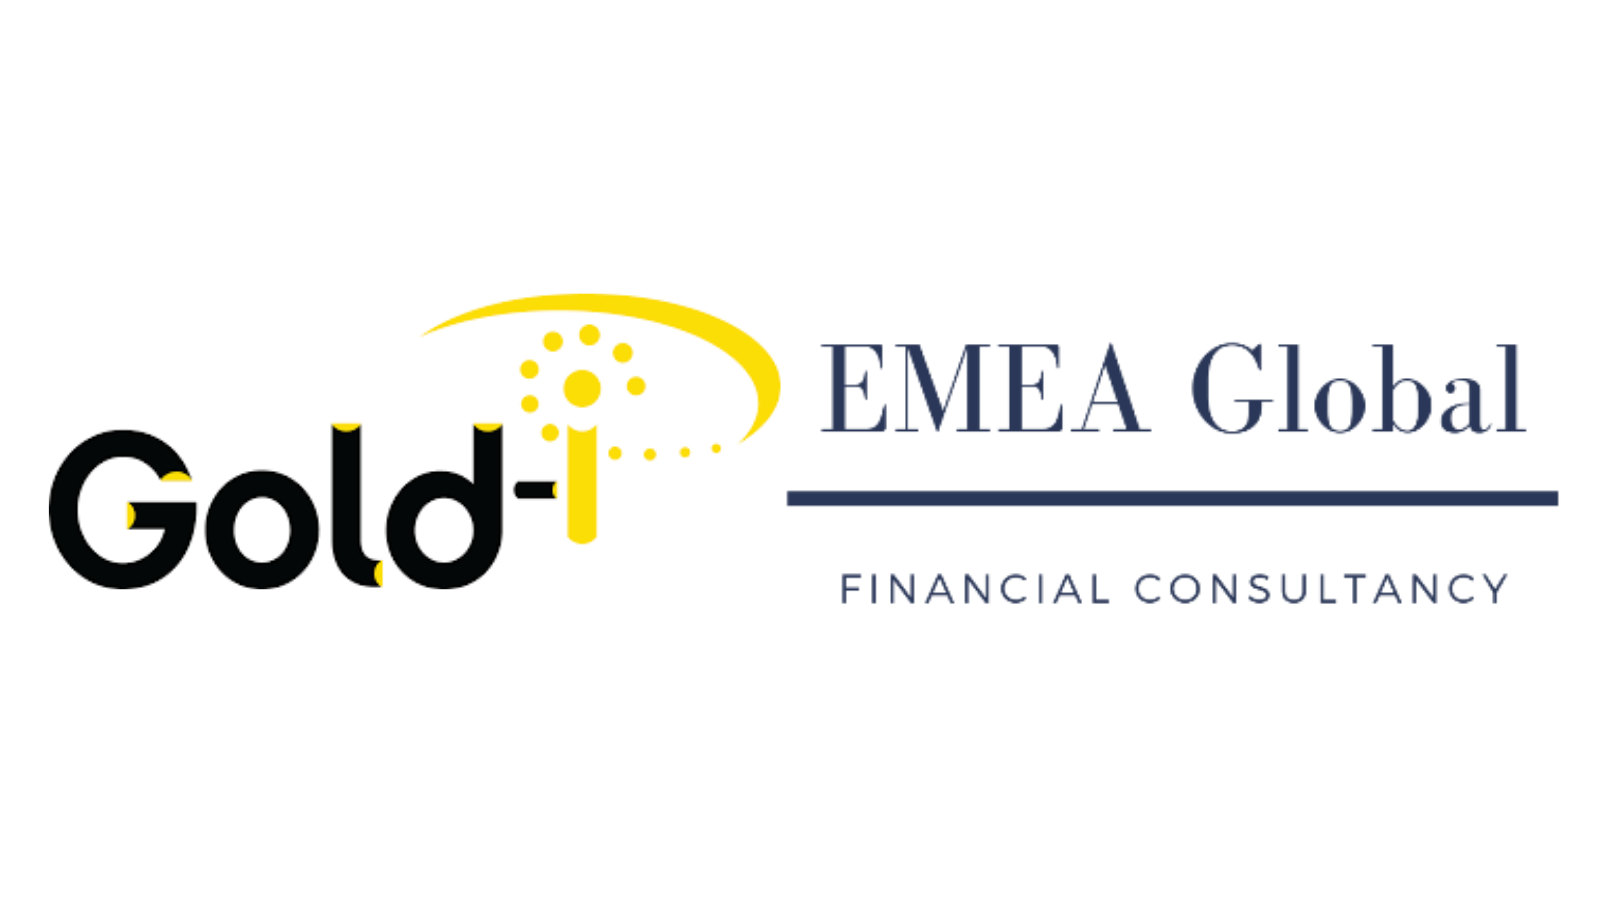 Gold-i Expands in the Middle East Through Partnership with EMEA Global Financial Consultancy, UAE